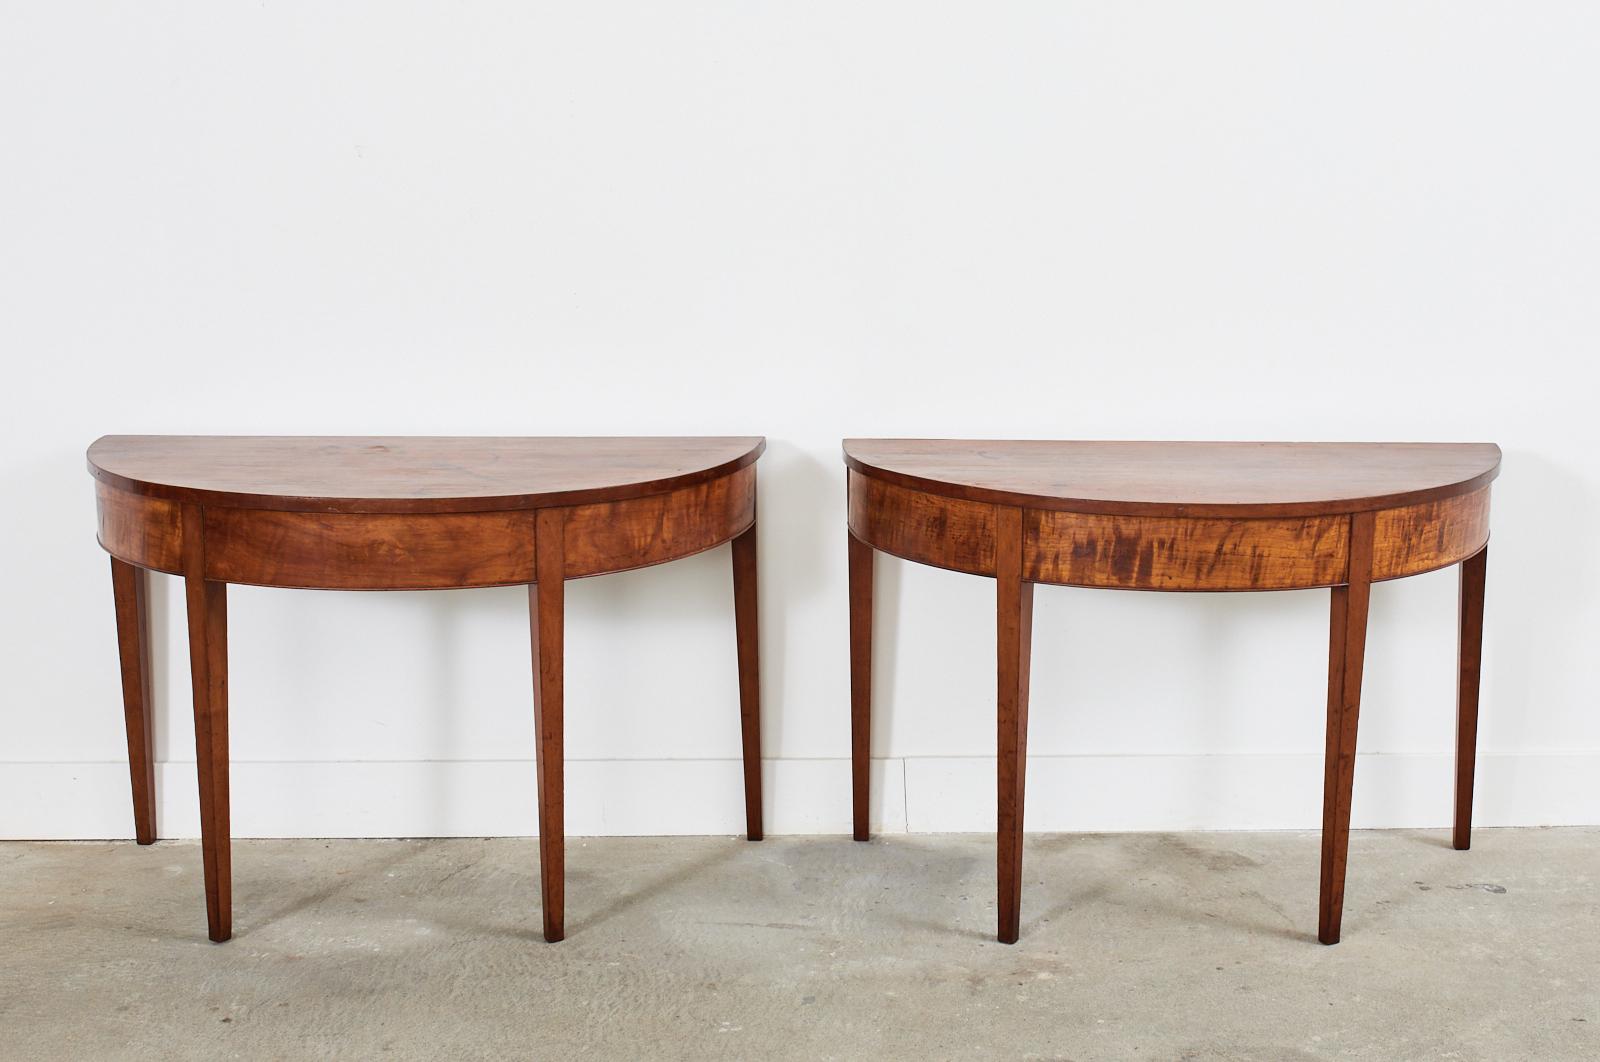 Hand-Crafted 19th Century Pair of English Georgian Mahogany Demilune Console Tables